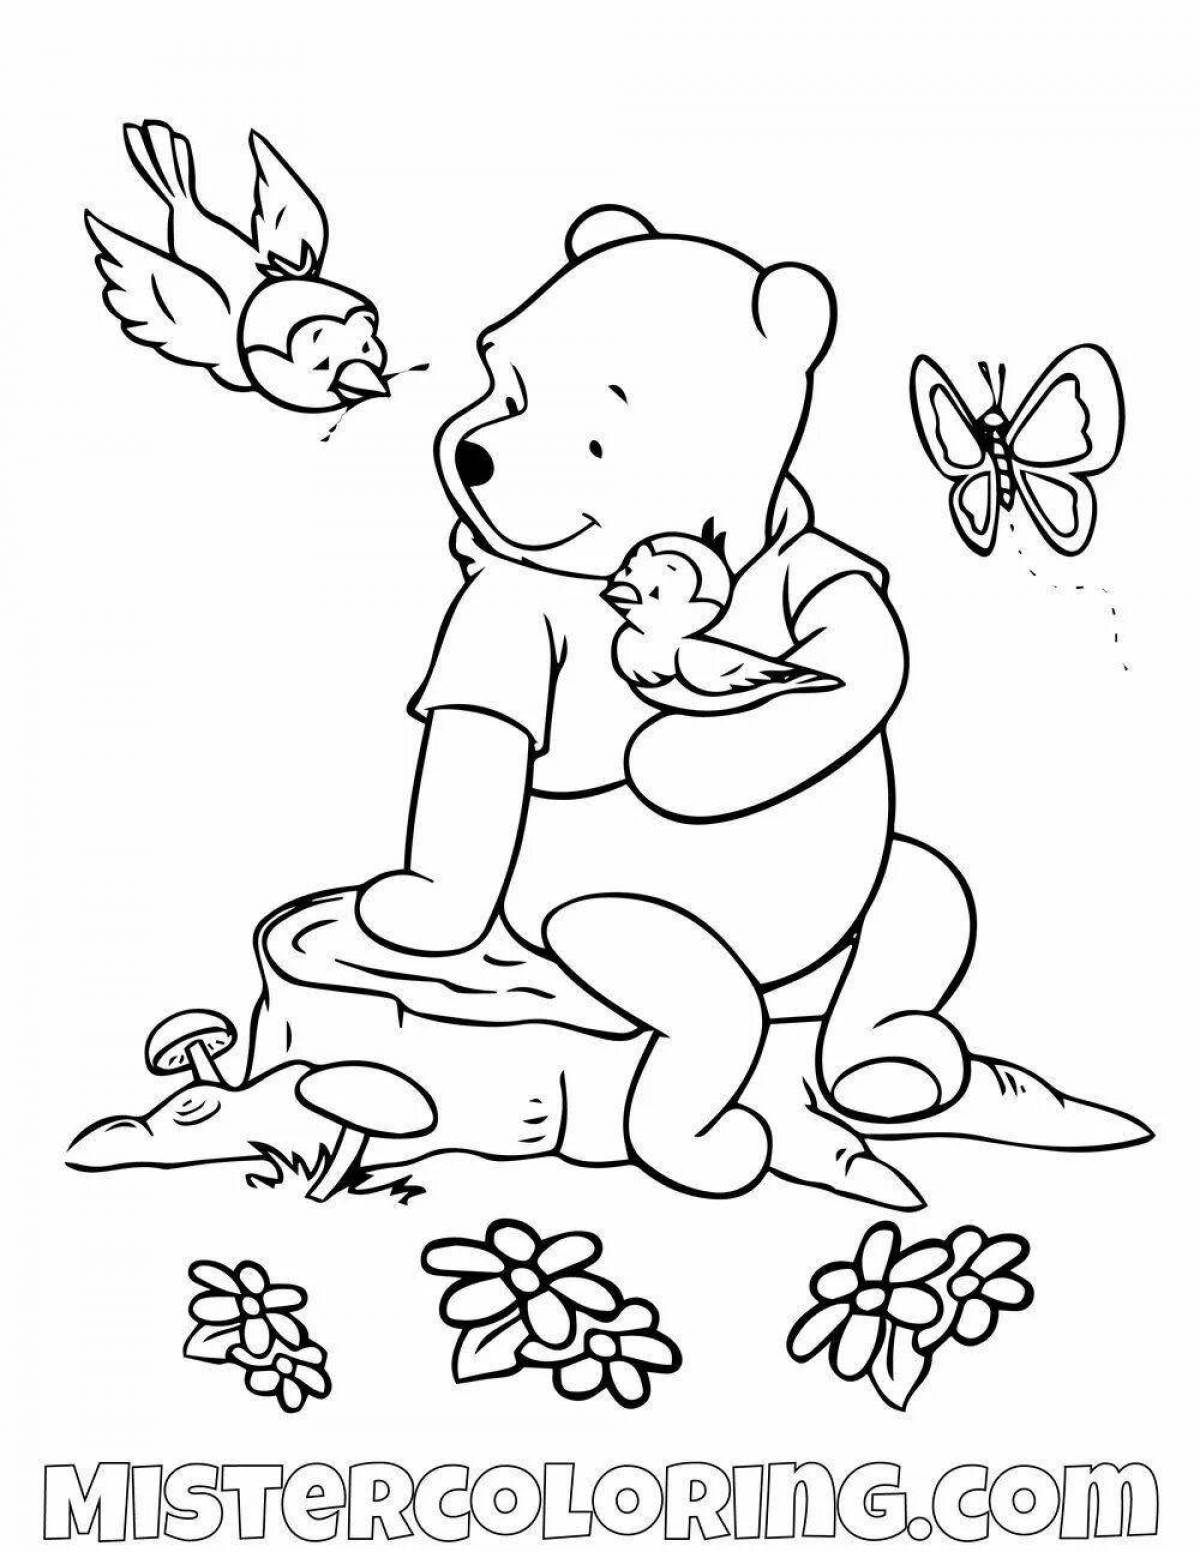 Coloring happy winnie the pooh and his friends